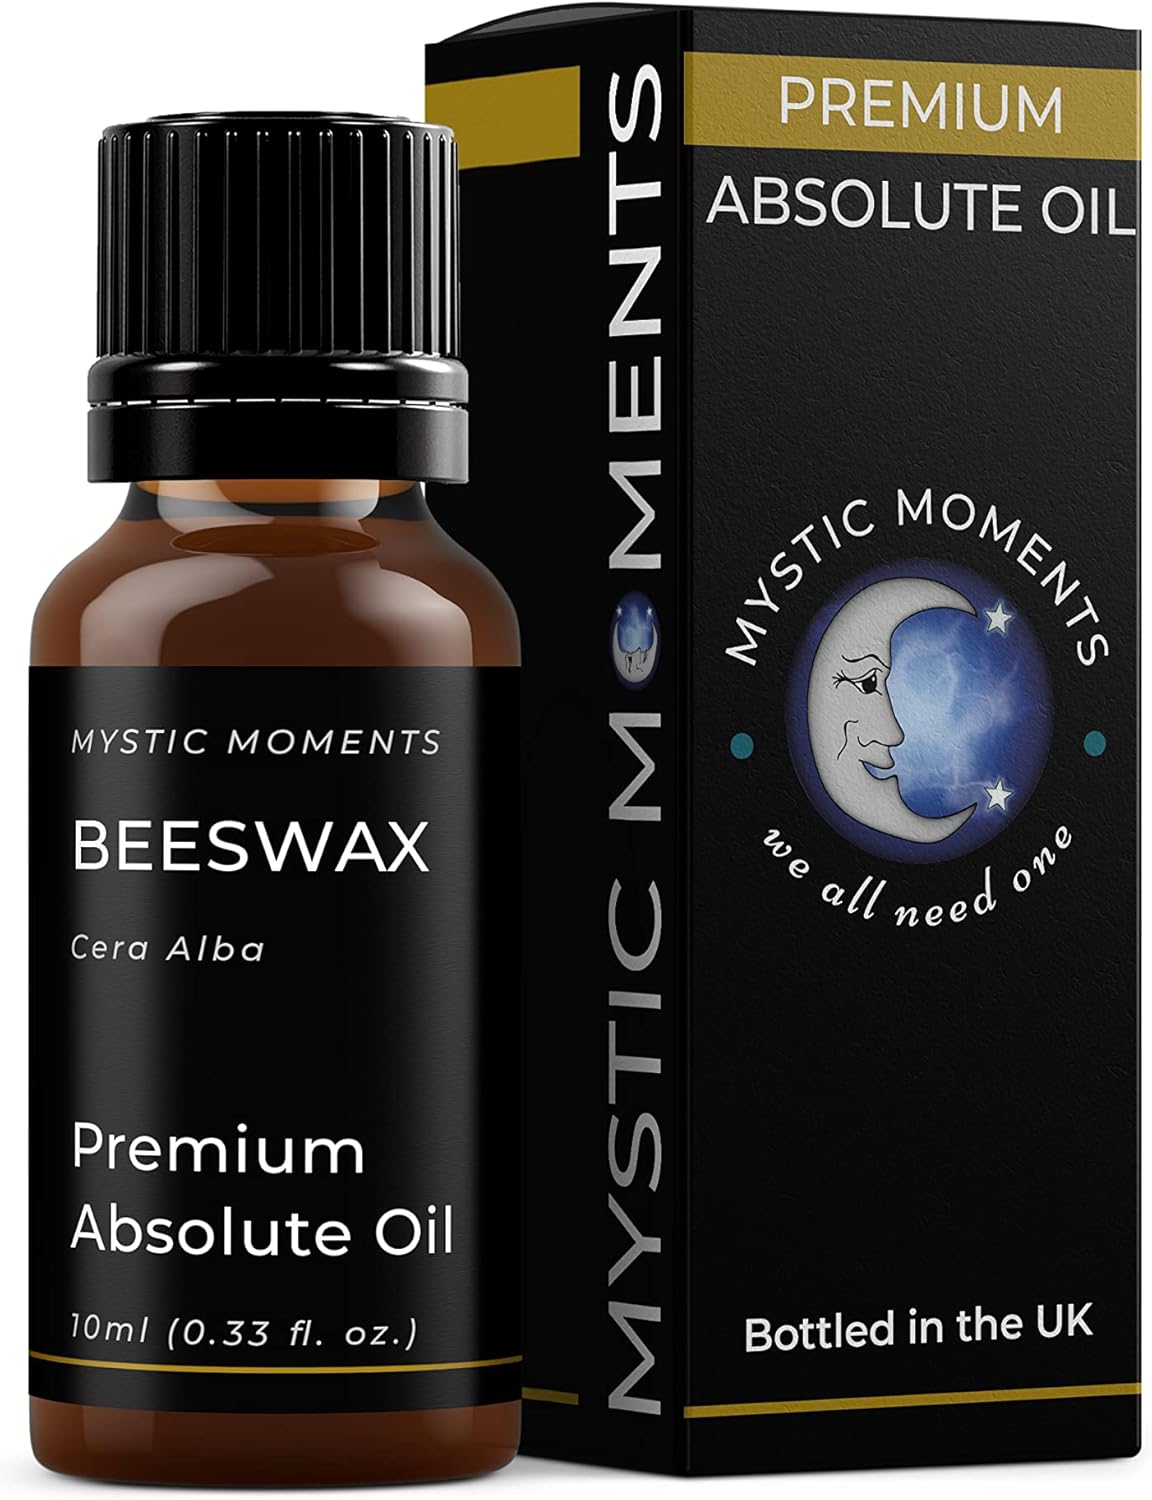 Mystic Moments | Beeswax Absolute Oil 10ml (Cera Alba) Pure & Natural Absolute Oil for Skincare, Perfumery & Aromatherapy